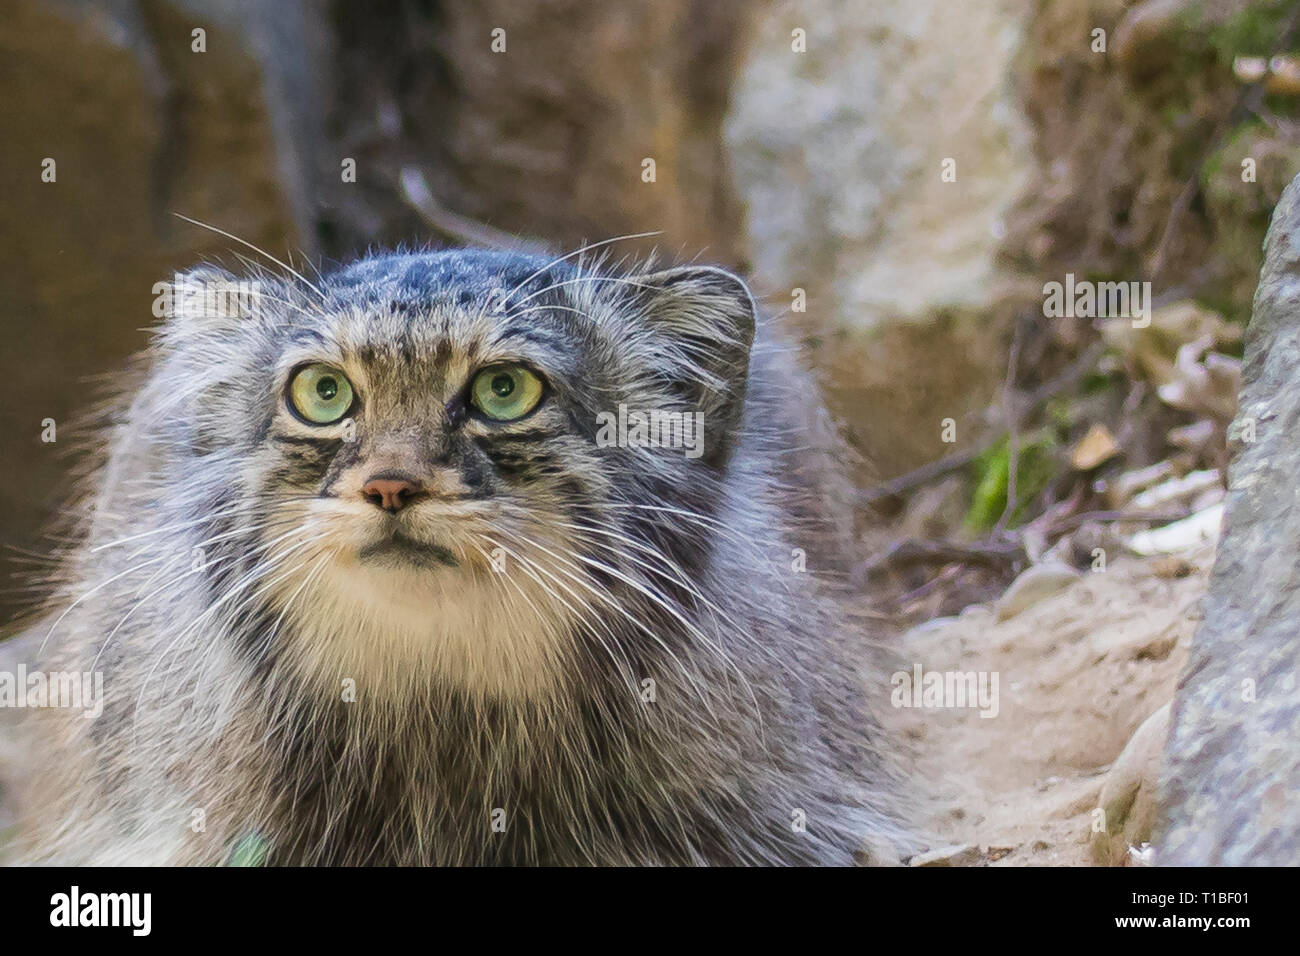 manul cat (otocolobus manul) close up portrait with copy space. Stock Photo